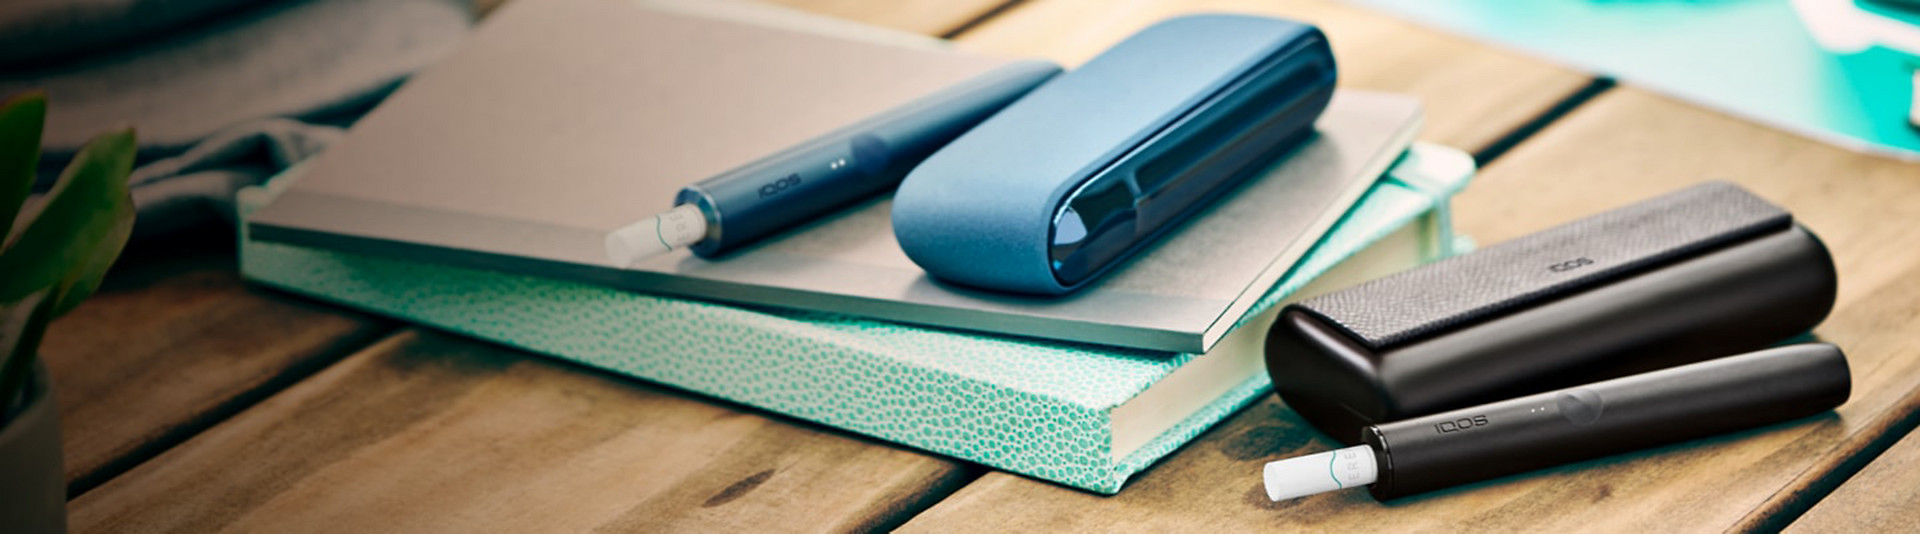 Two iqos ILUMA Devices resting on a wooden table, one of which rests on a blue notebook